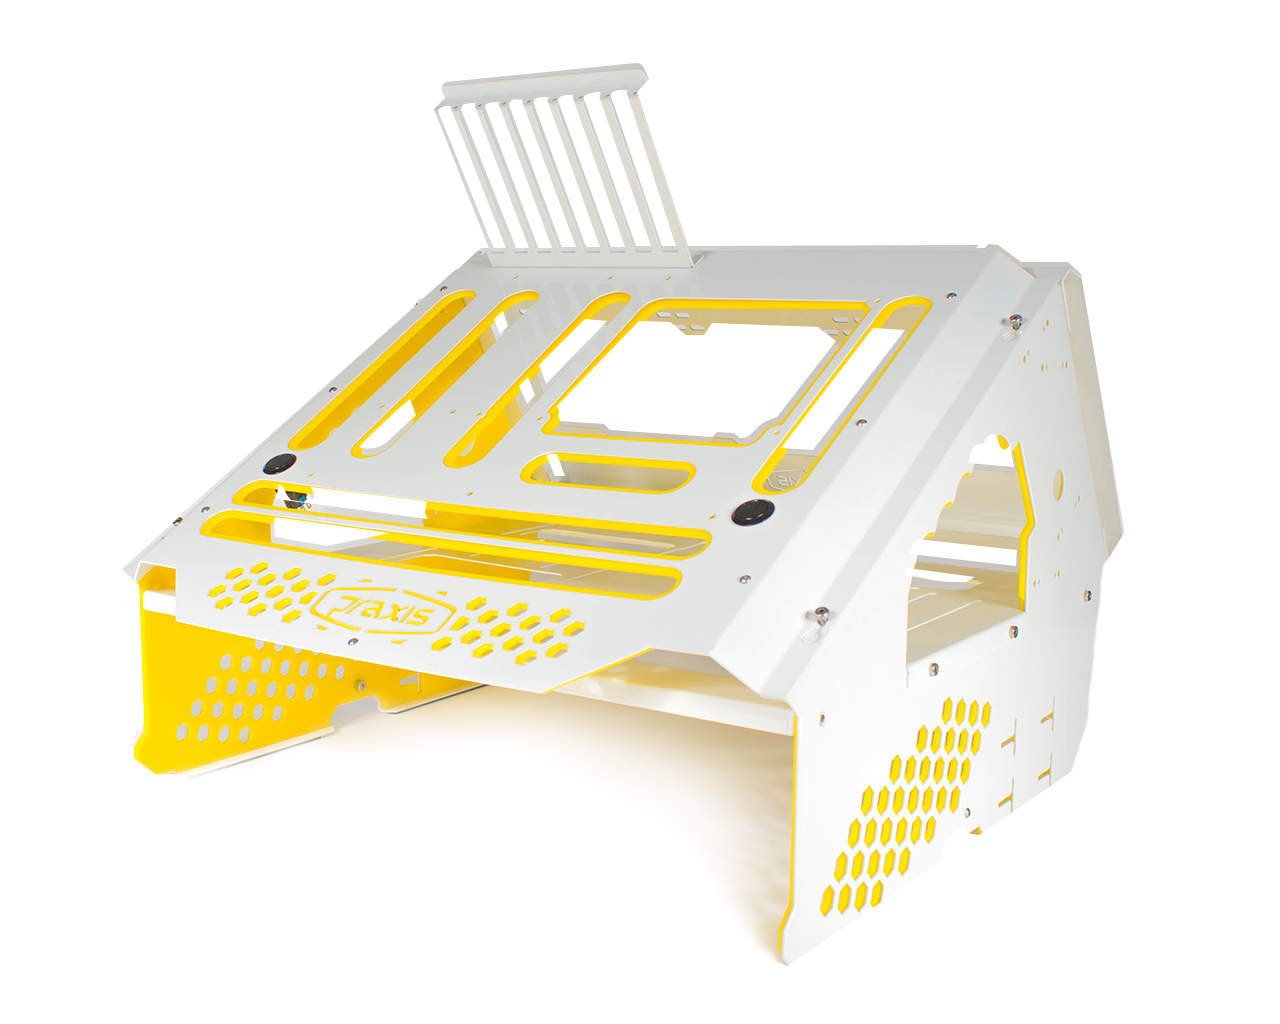 PrimoChill's Praxis Wetbench Powdercoated Steel Modular Open Air Computer Test Bench for Watercooling or Air Cooled Components - PrimoChill - KEEPING IT COOL White w/Solid Yellow Accents